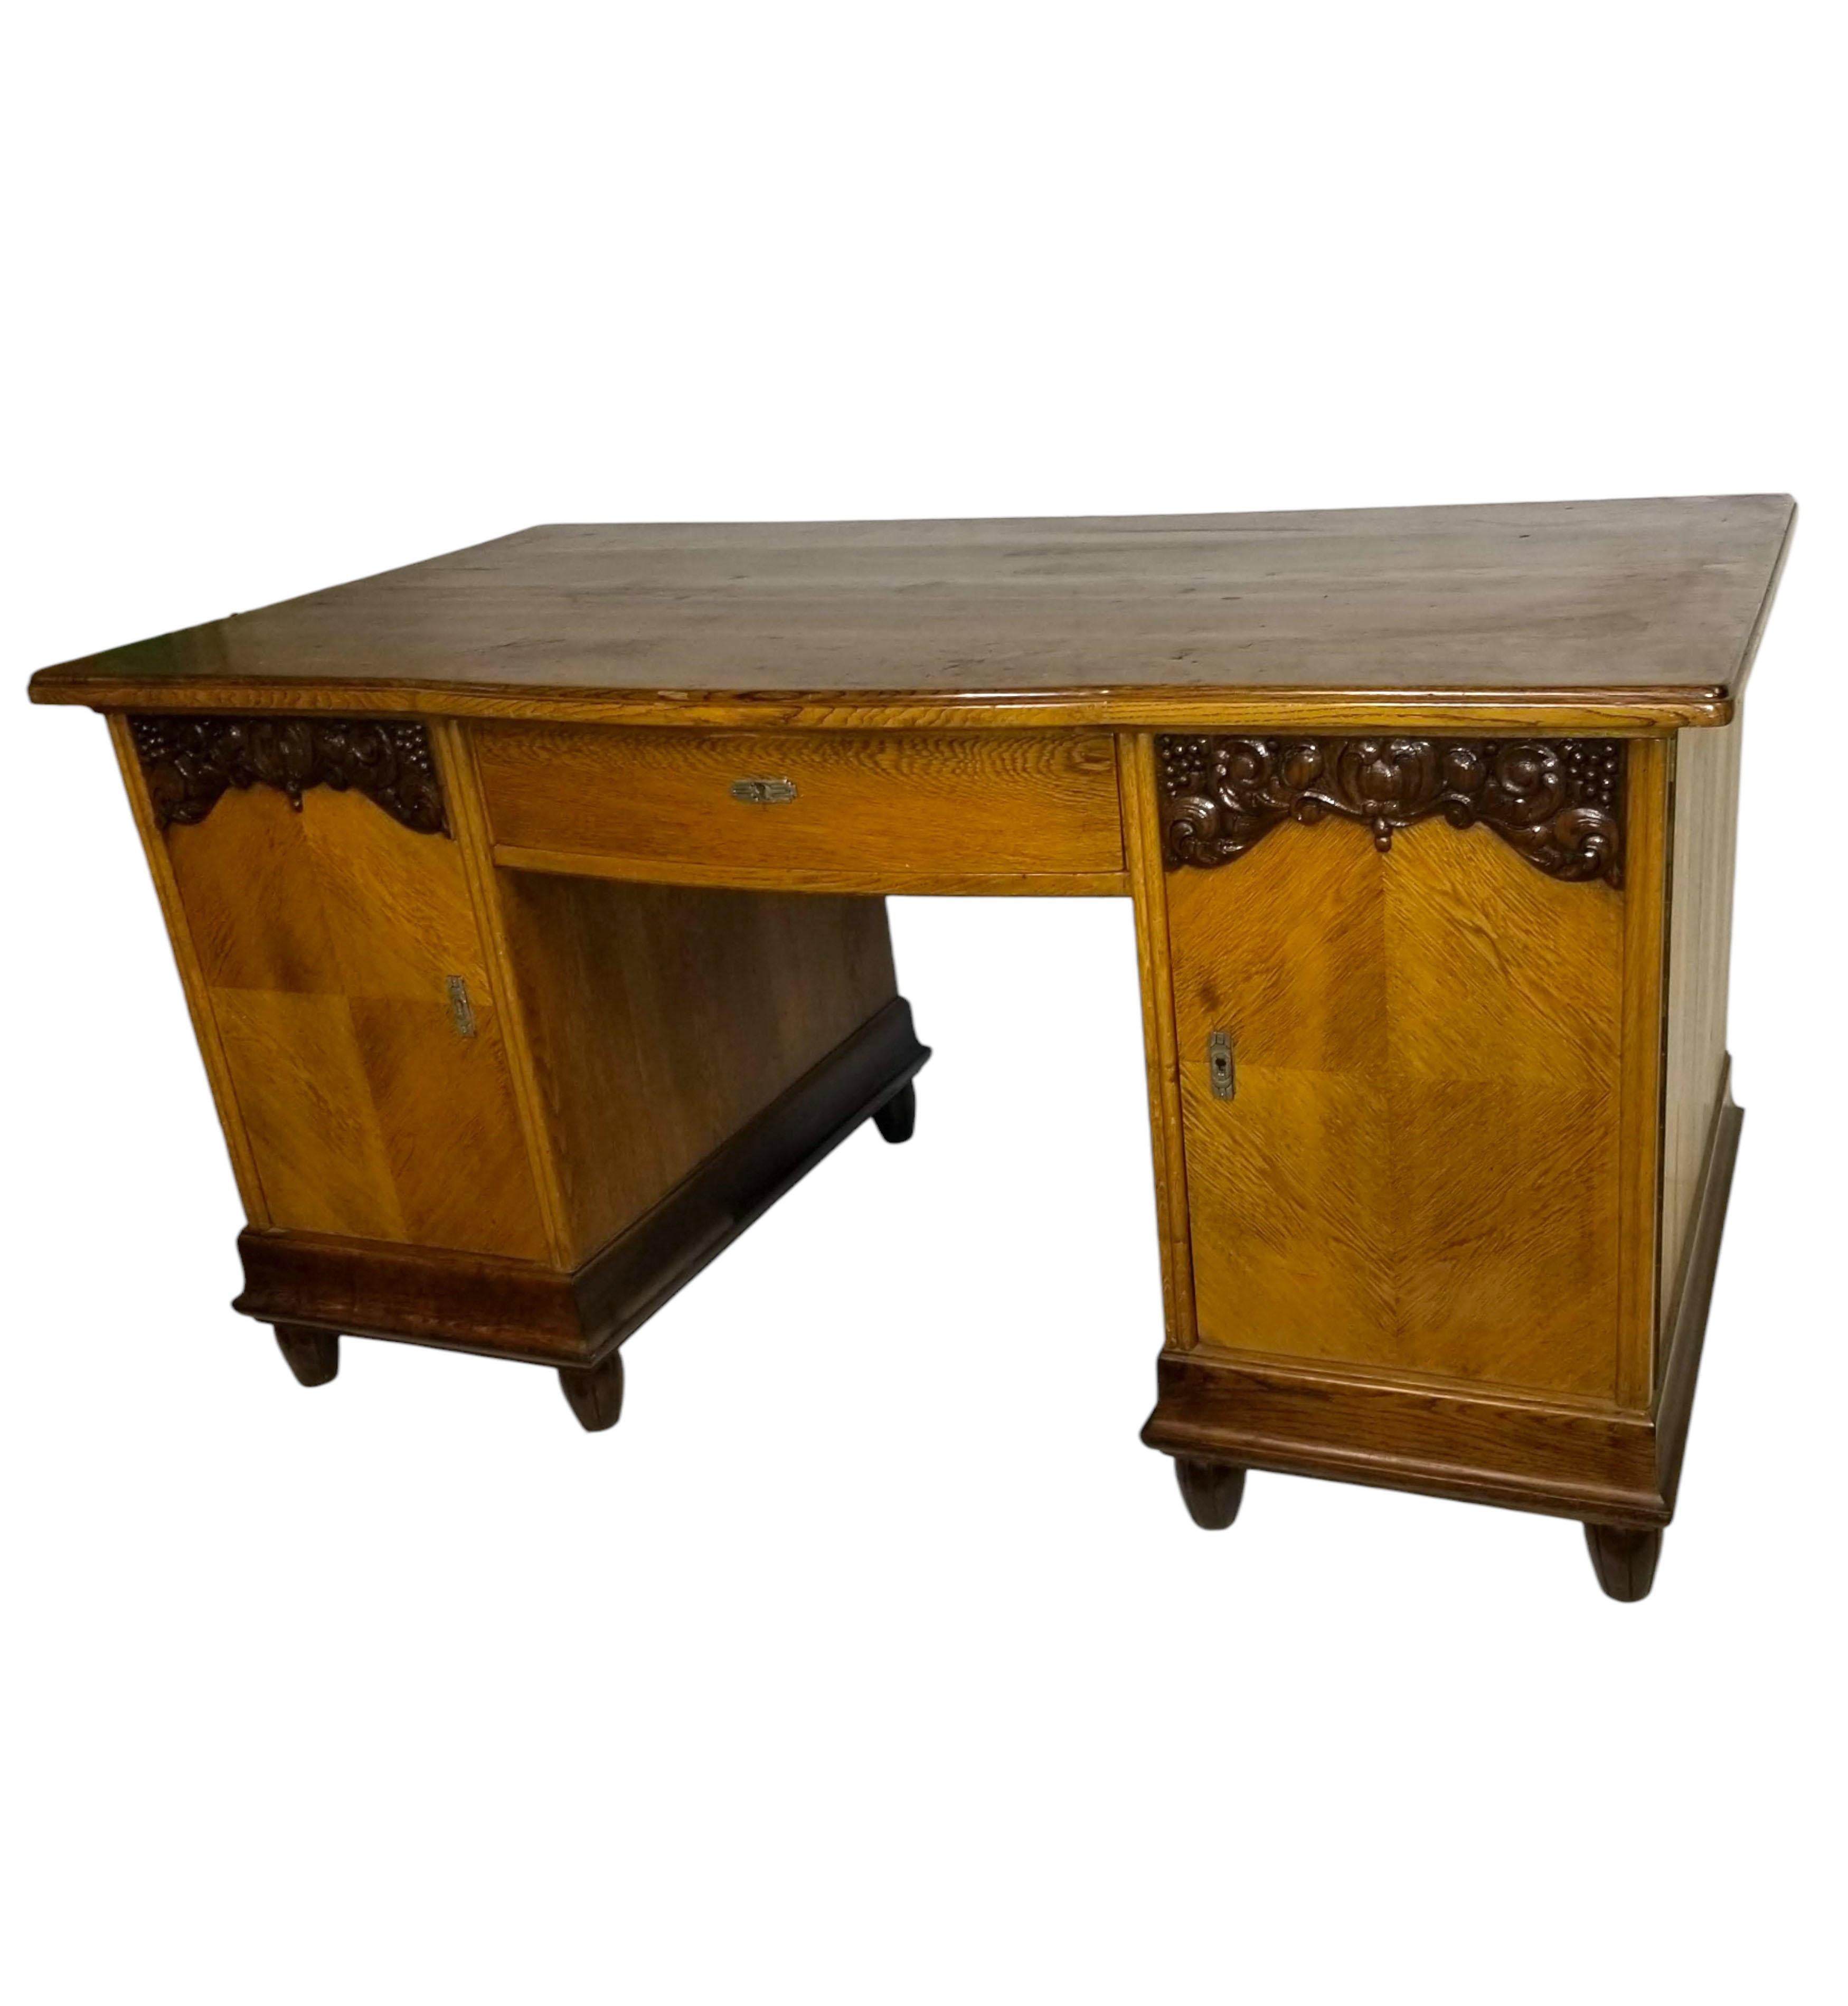 An original and unique French kneehole two-tone desk crafted from hand-carved oak and elevated on eight fluted toupie feet. It features a central drawer and two doors, with one side door unveiling a frieze of three drawers arranged in a stepped